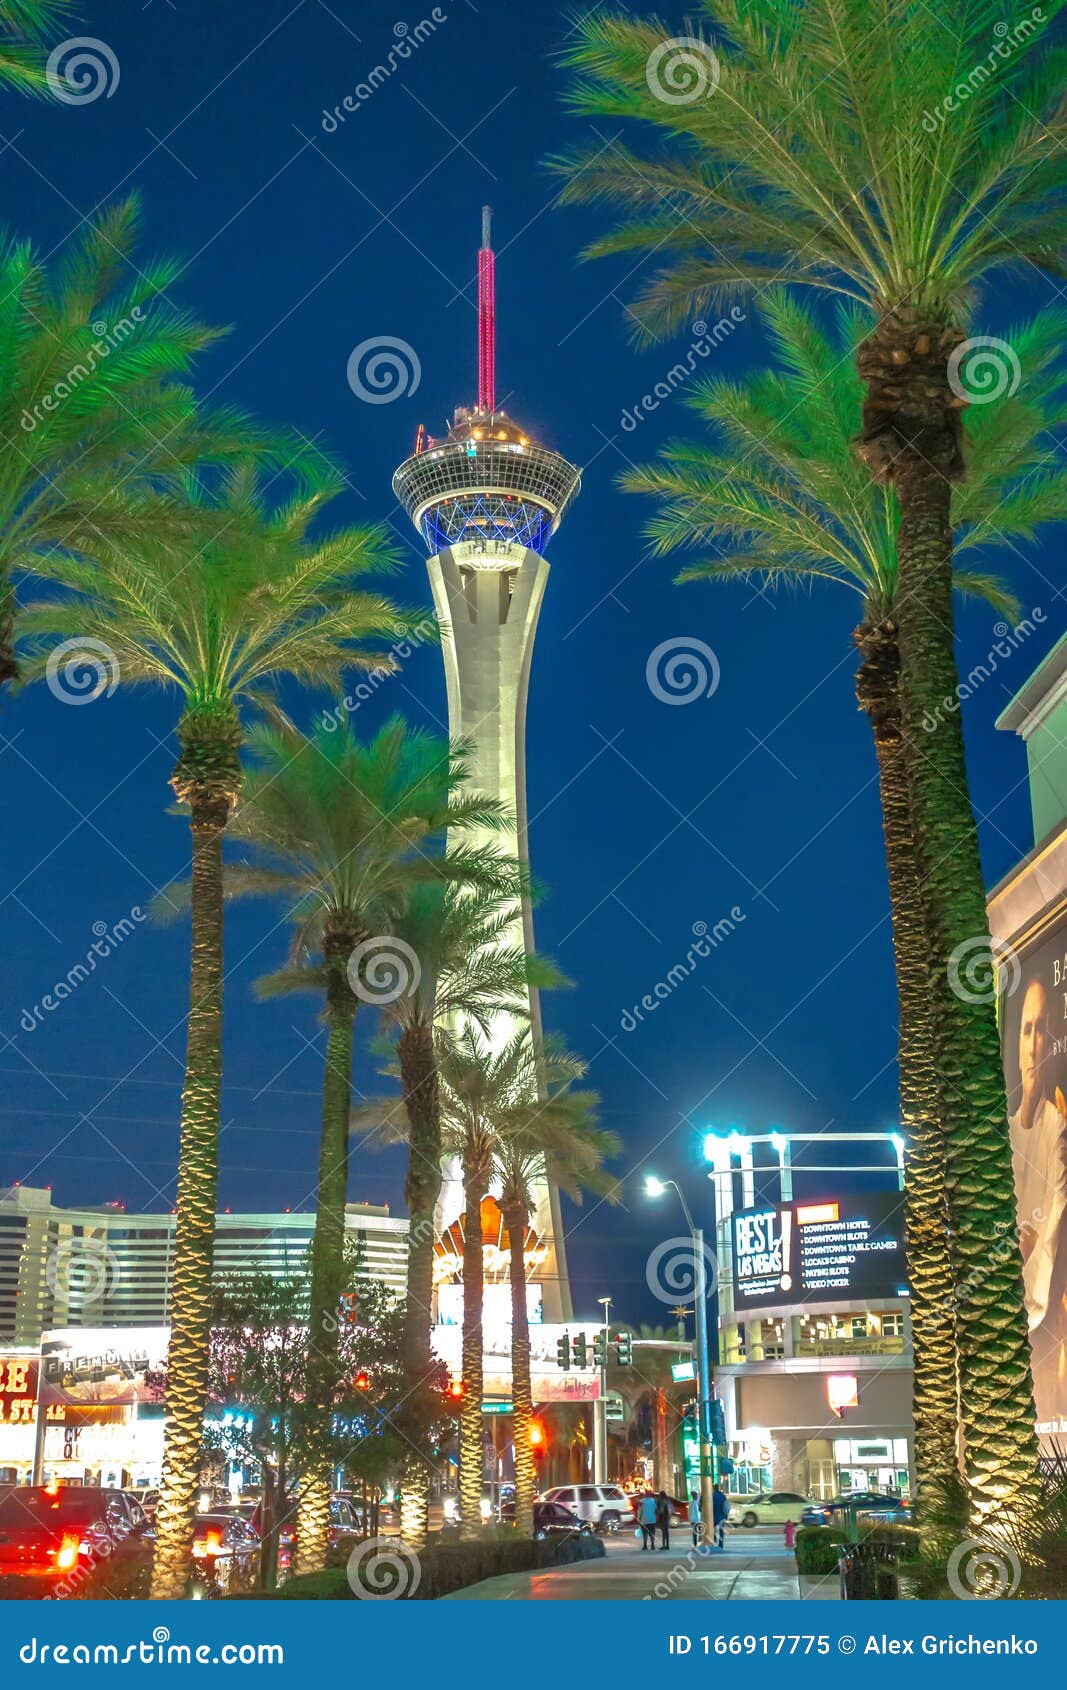 Stratosphere Las Vegas at Sunset Evening Time Editorial Image - Image ...